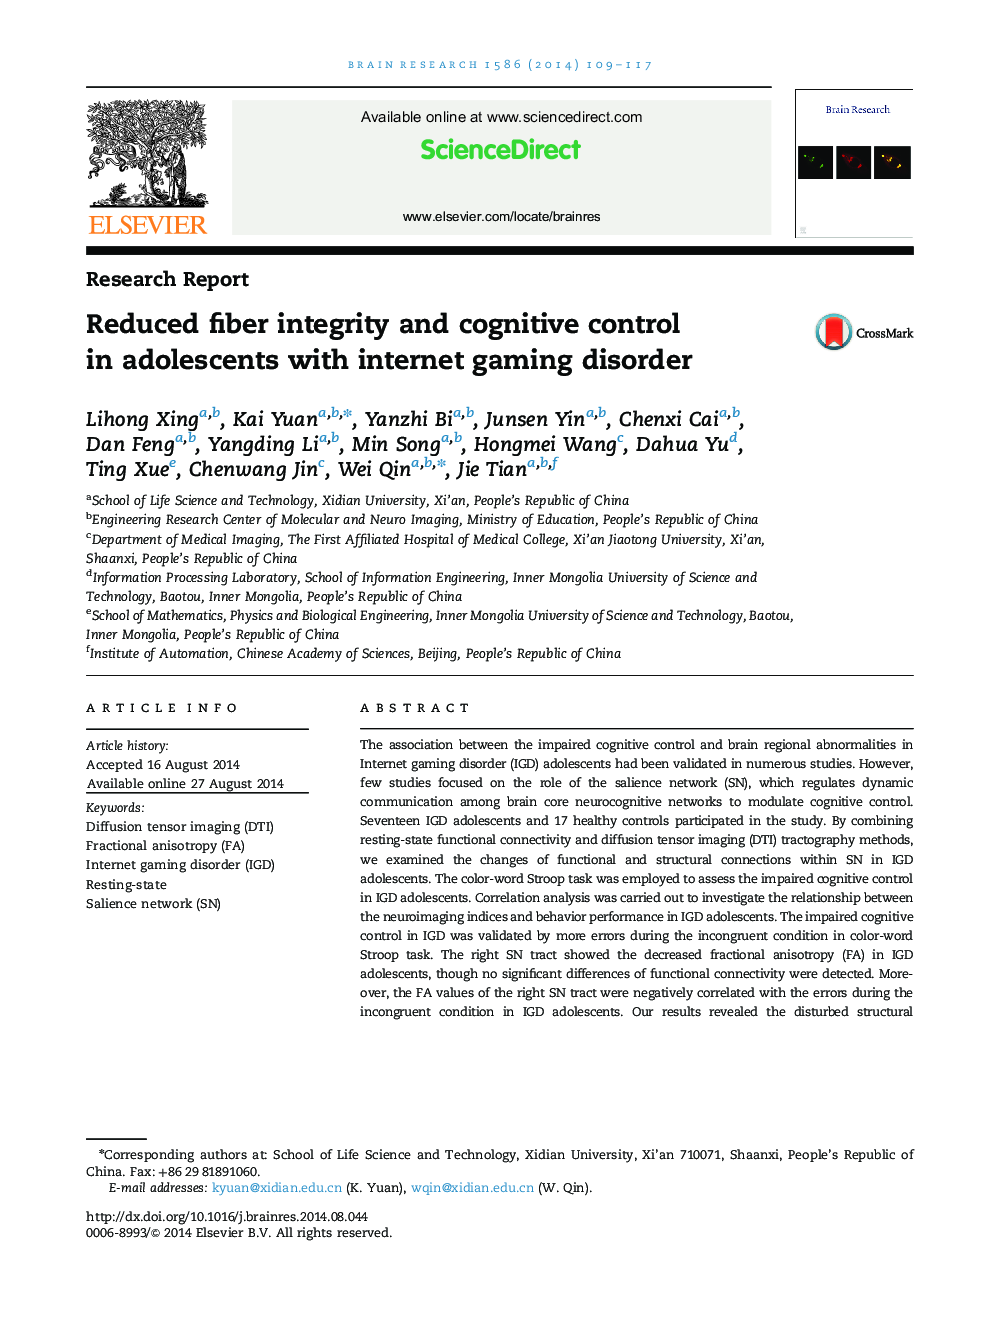 Research ReportReduced fiber integrity and cognitive control in adolescents with internet gaming disorder